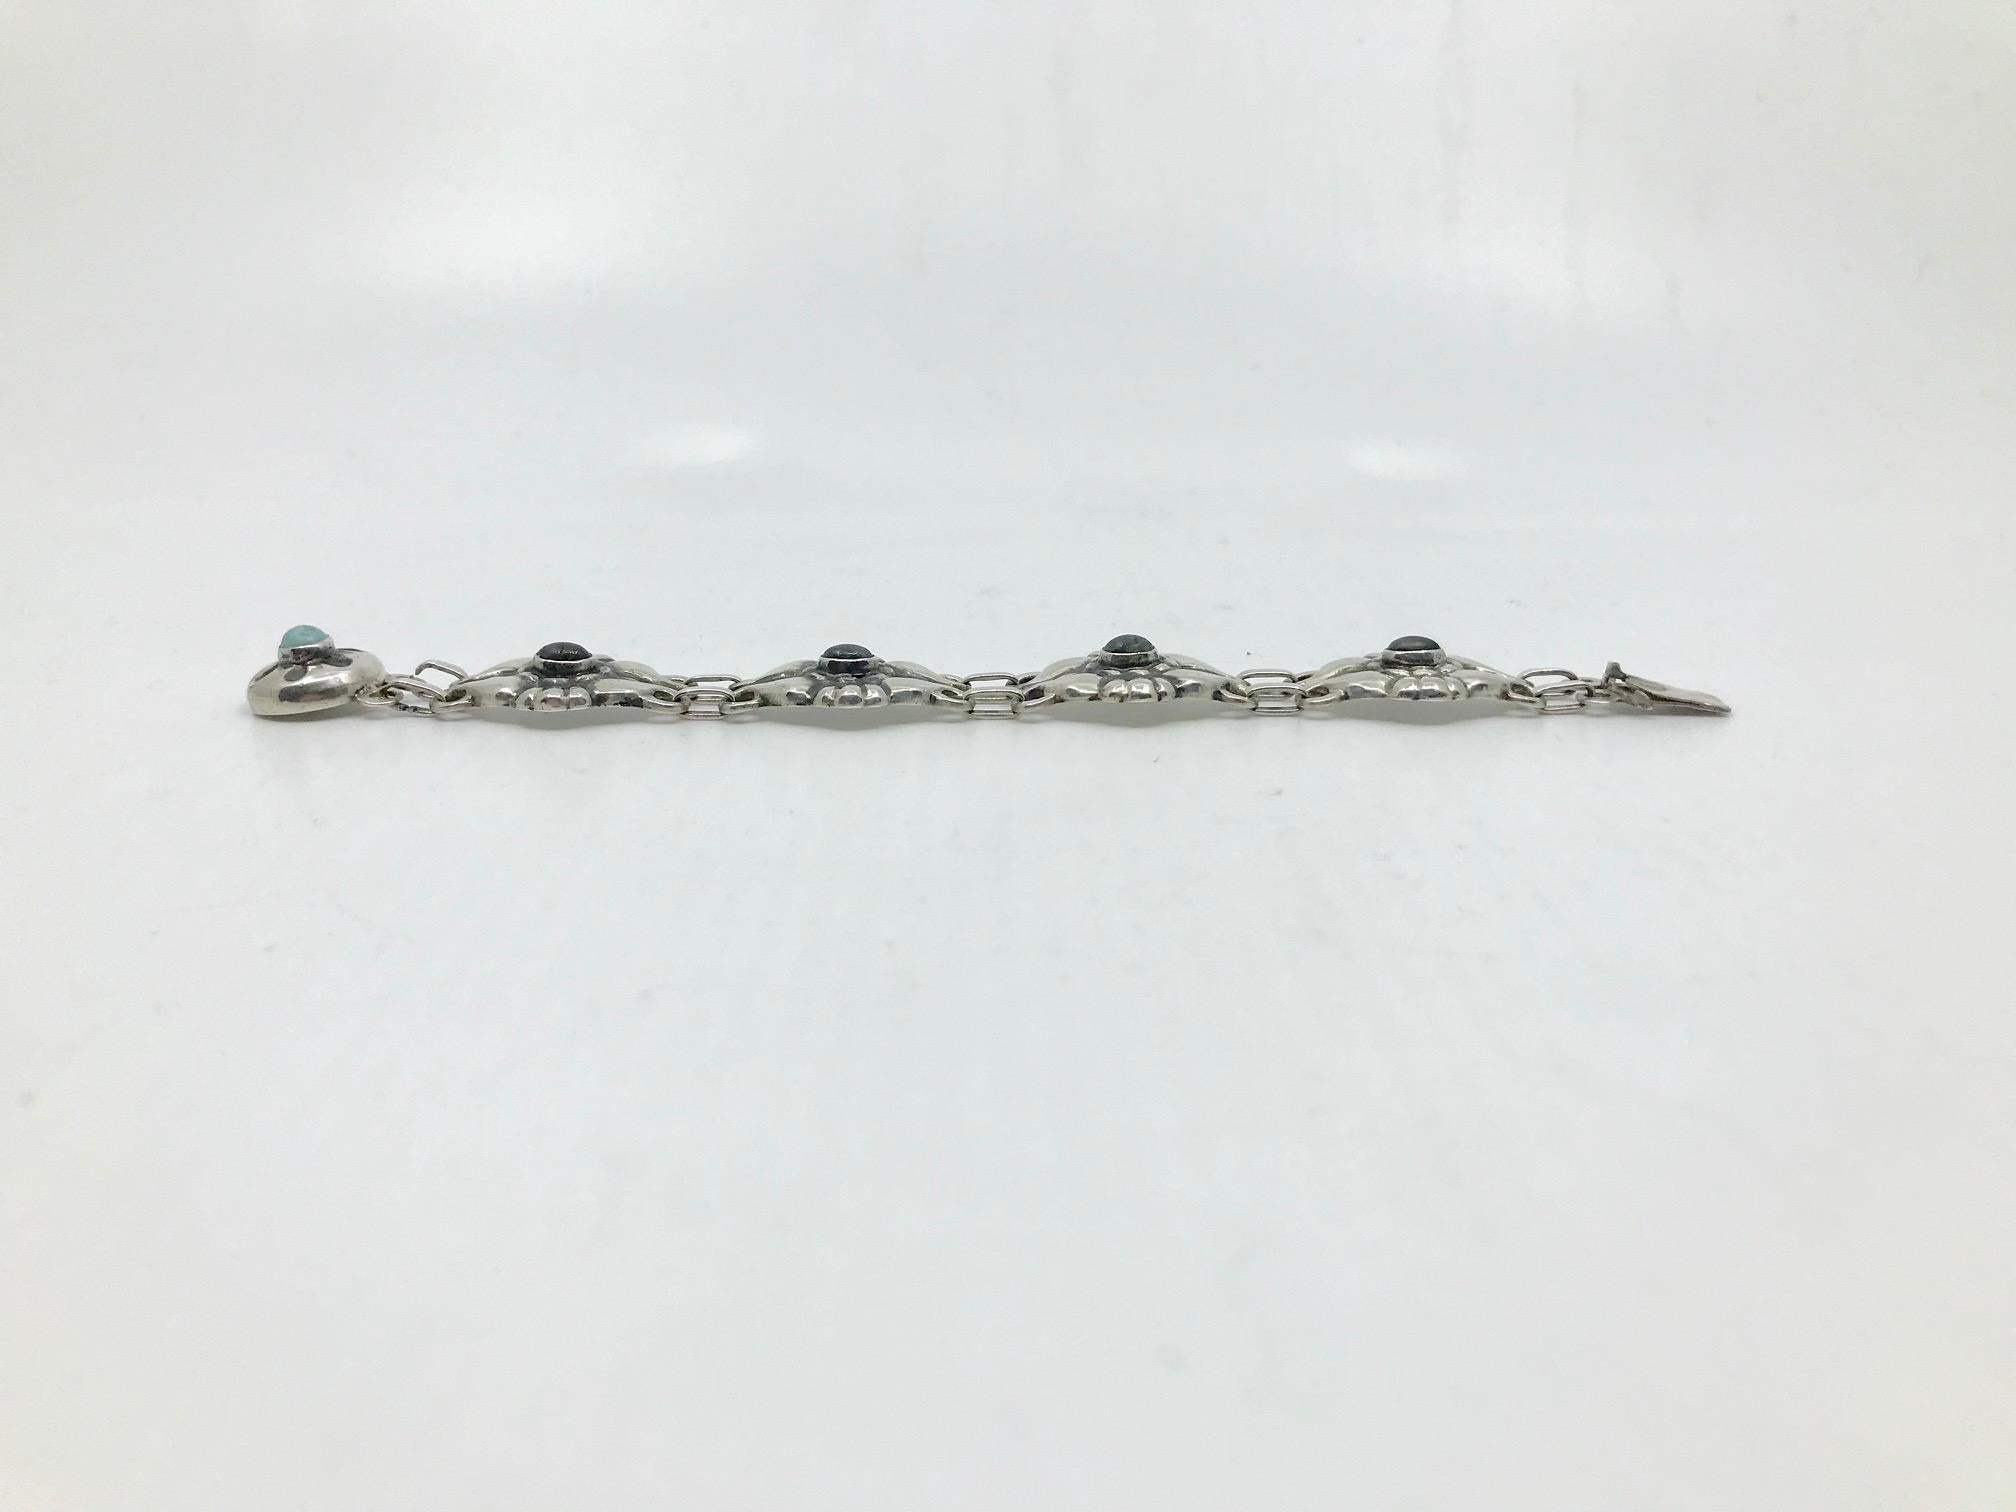 This is a very rare antique Georg Jensen silver bracelet with four cabochon set labradorites and one opal, design #4 by Georg Jensen.
Measures 6 3/8″ in length, the links are 13/16″ across (16.2cm, 2cm).
Antique Georg Jensen hallmarks from